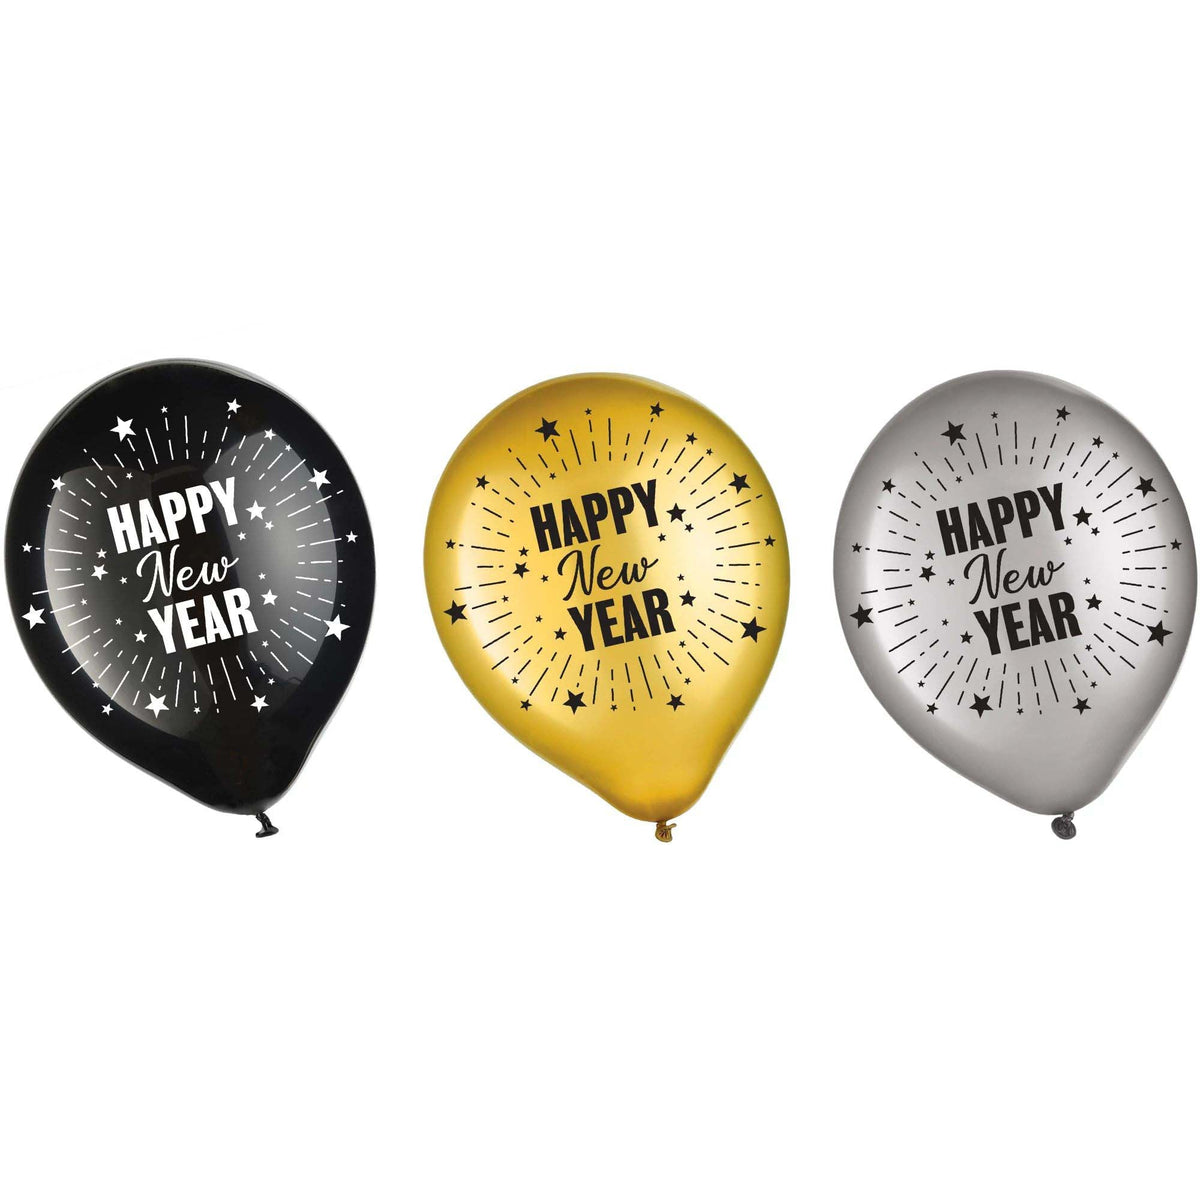 AMSCAN CA New Year Happy New Year Latex Balloons, Black, Gold and Silver, 12 Inches, 15 Count